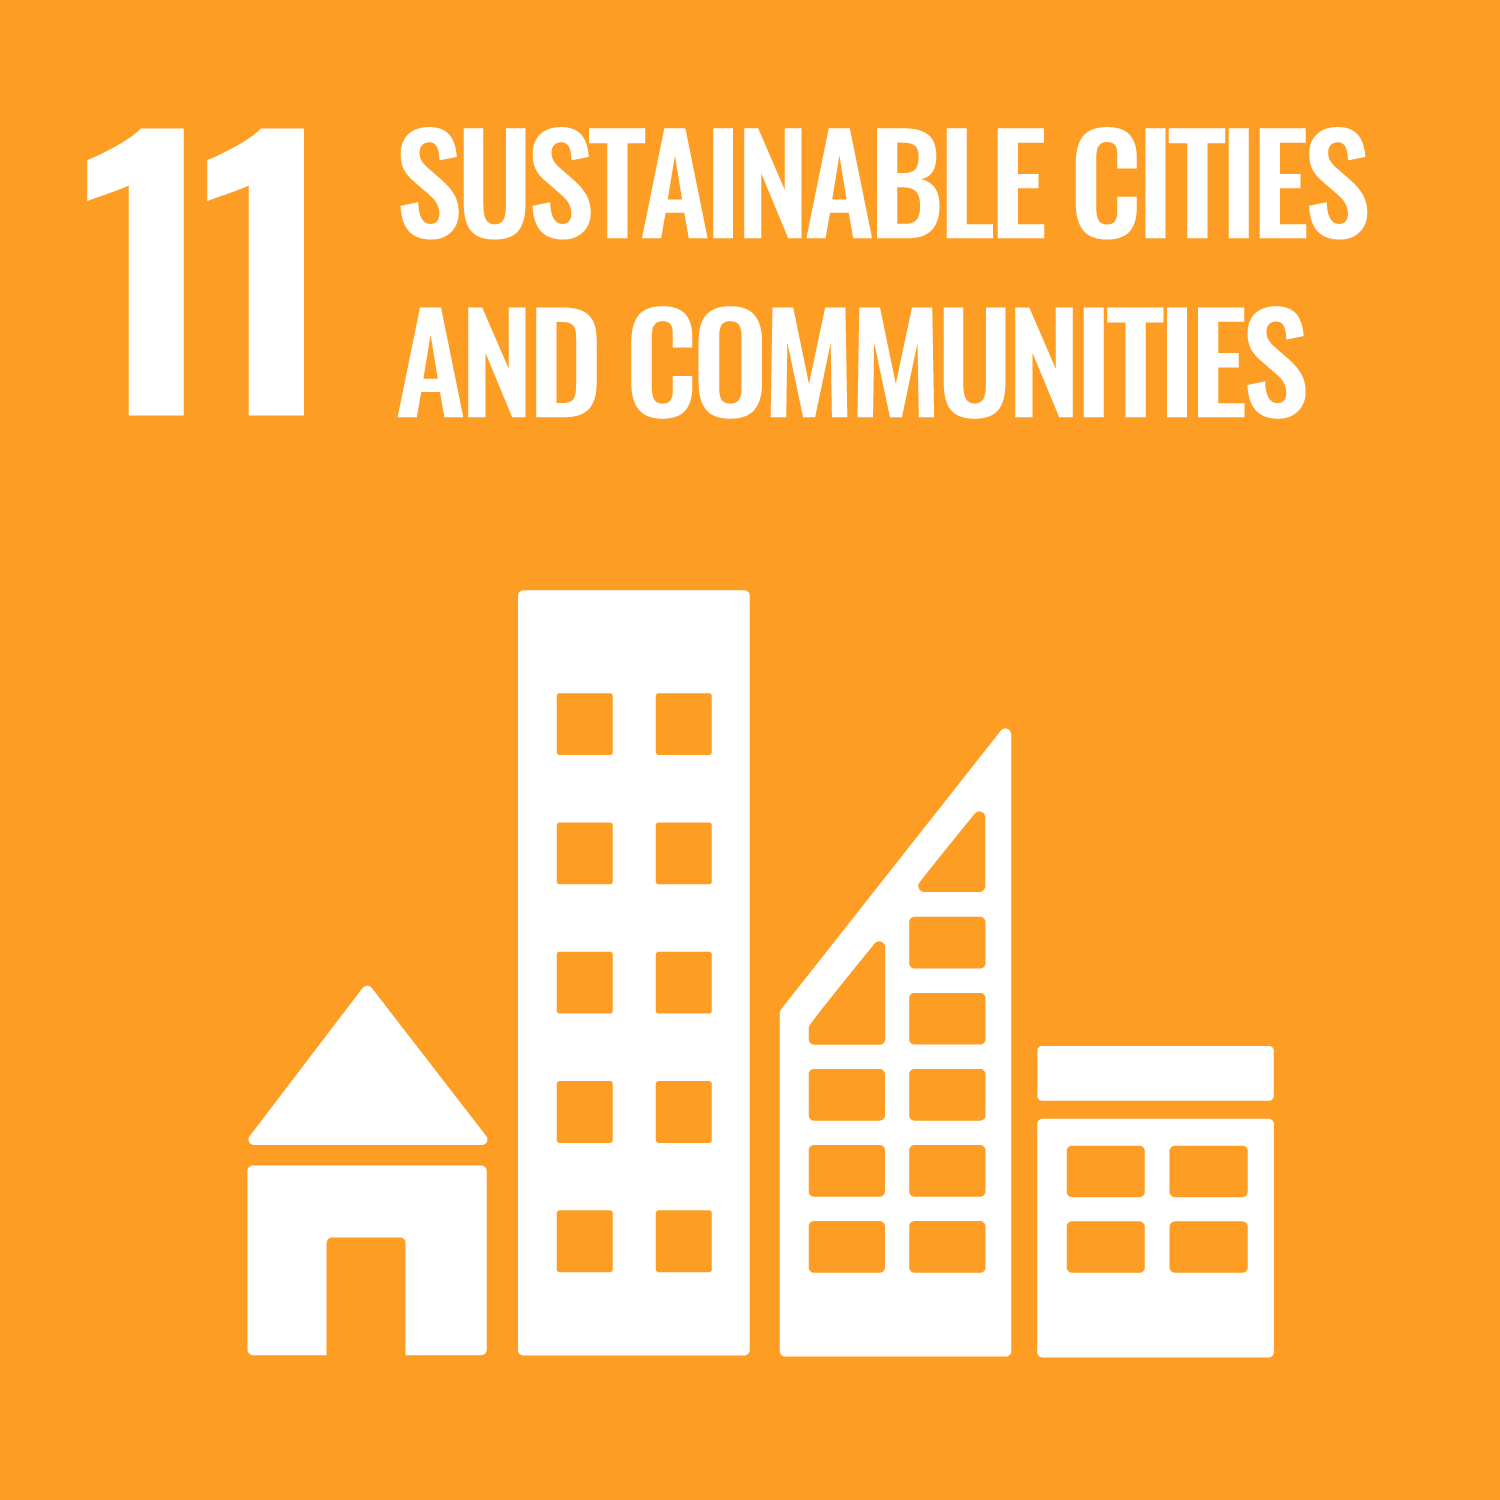 sustainable-cities-and-communities